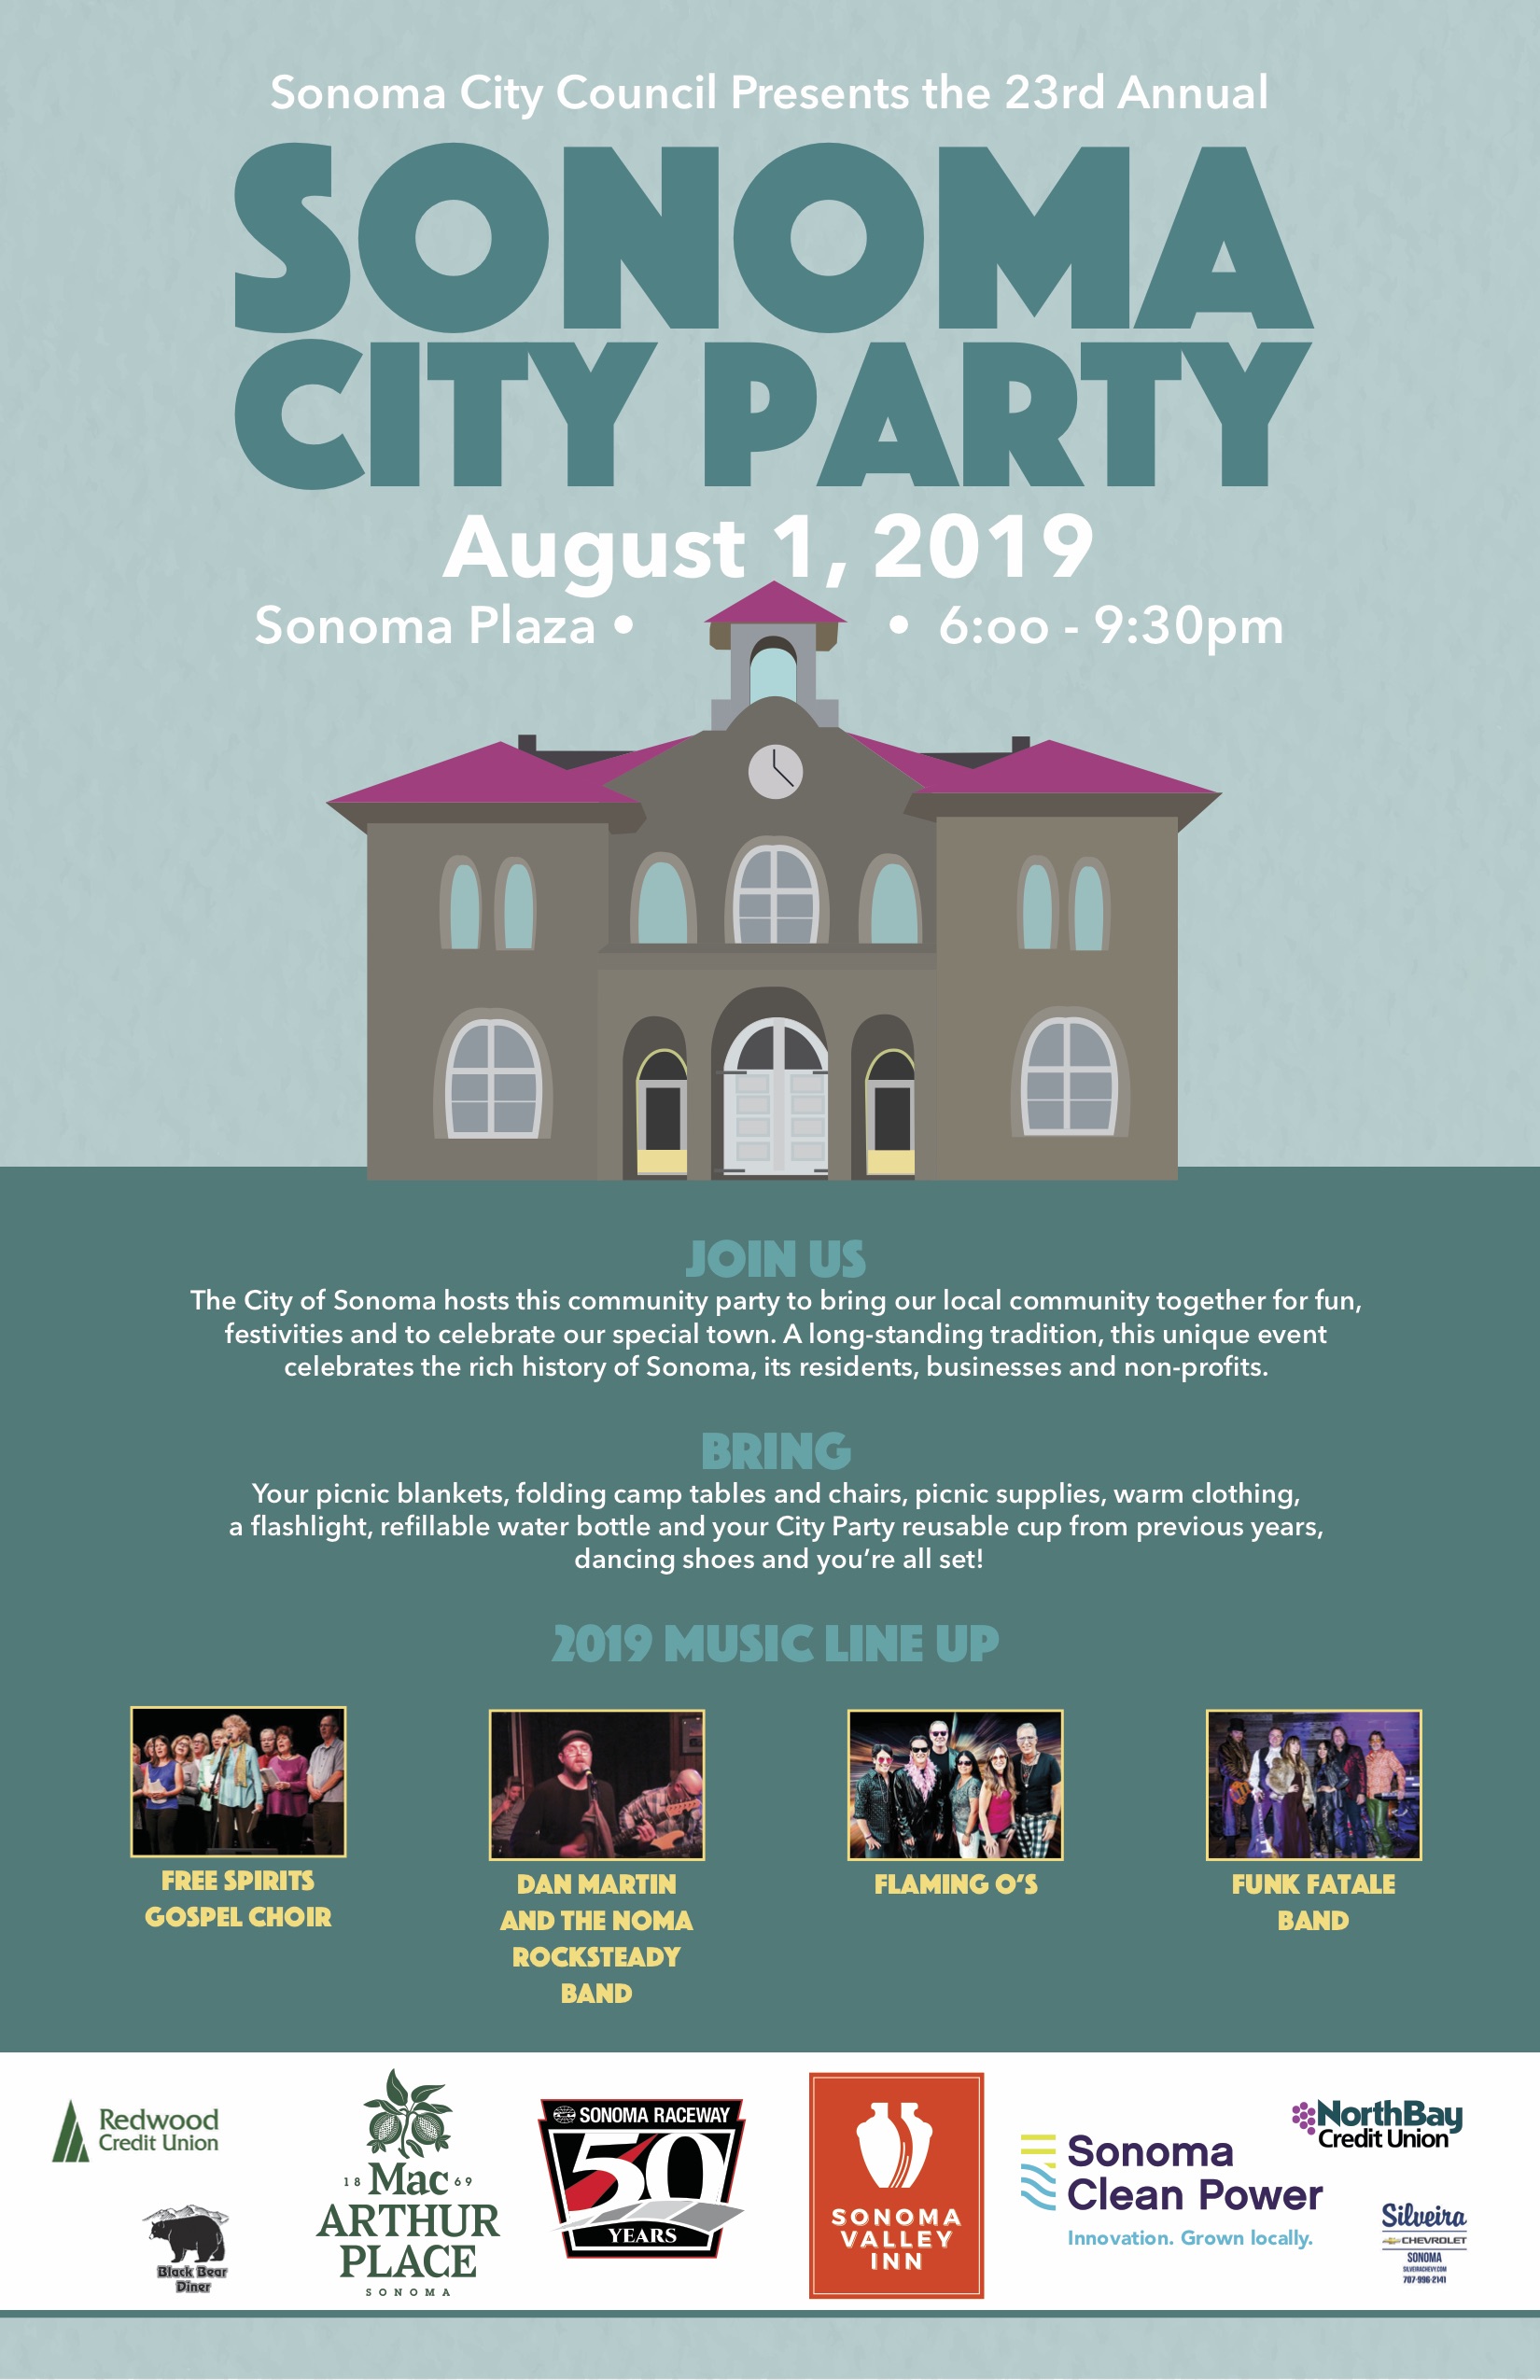 Sonoma City Party, August 1st, 2019, 6-9:30 pm